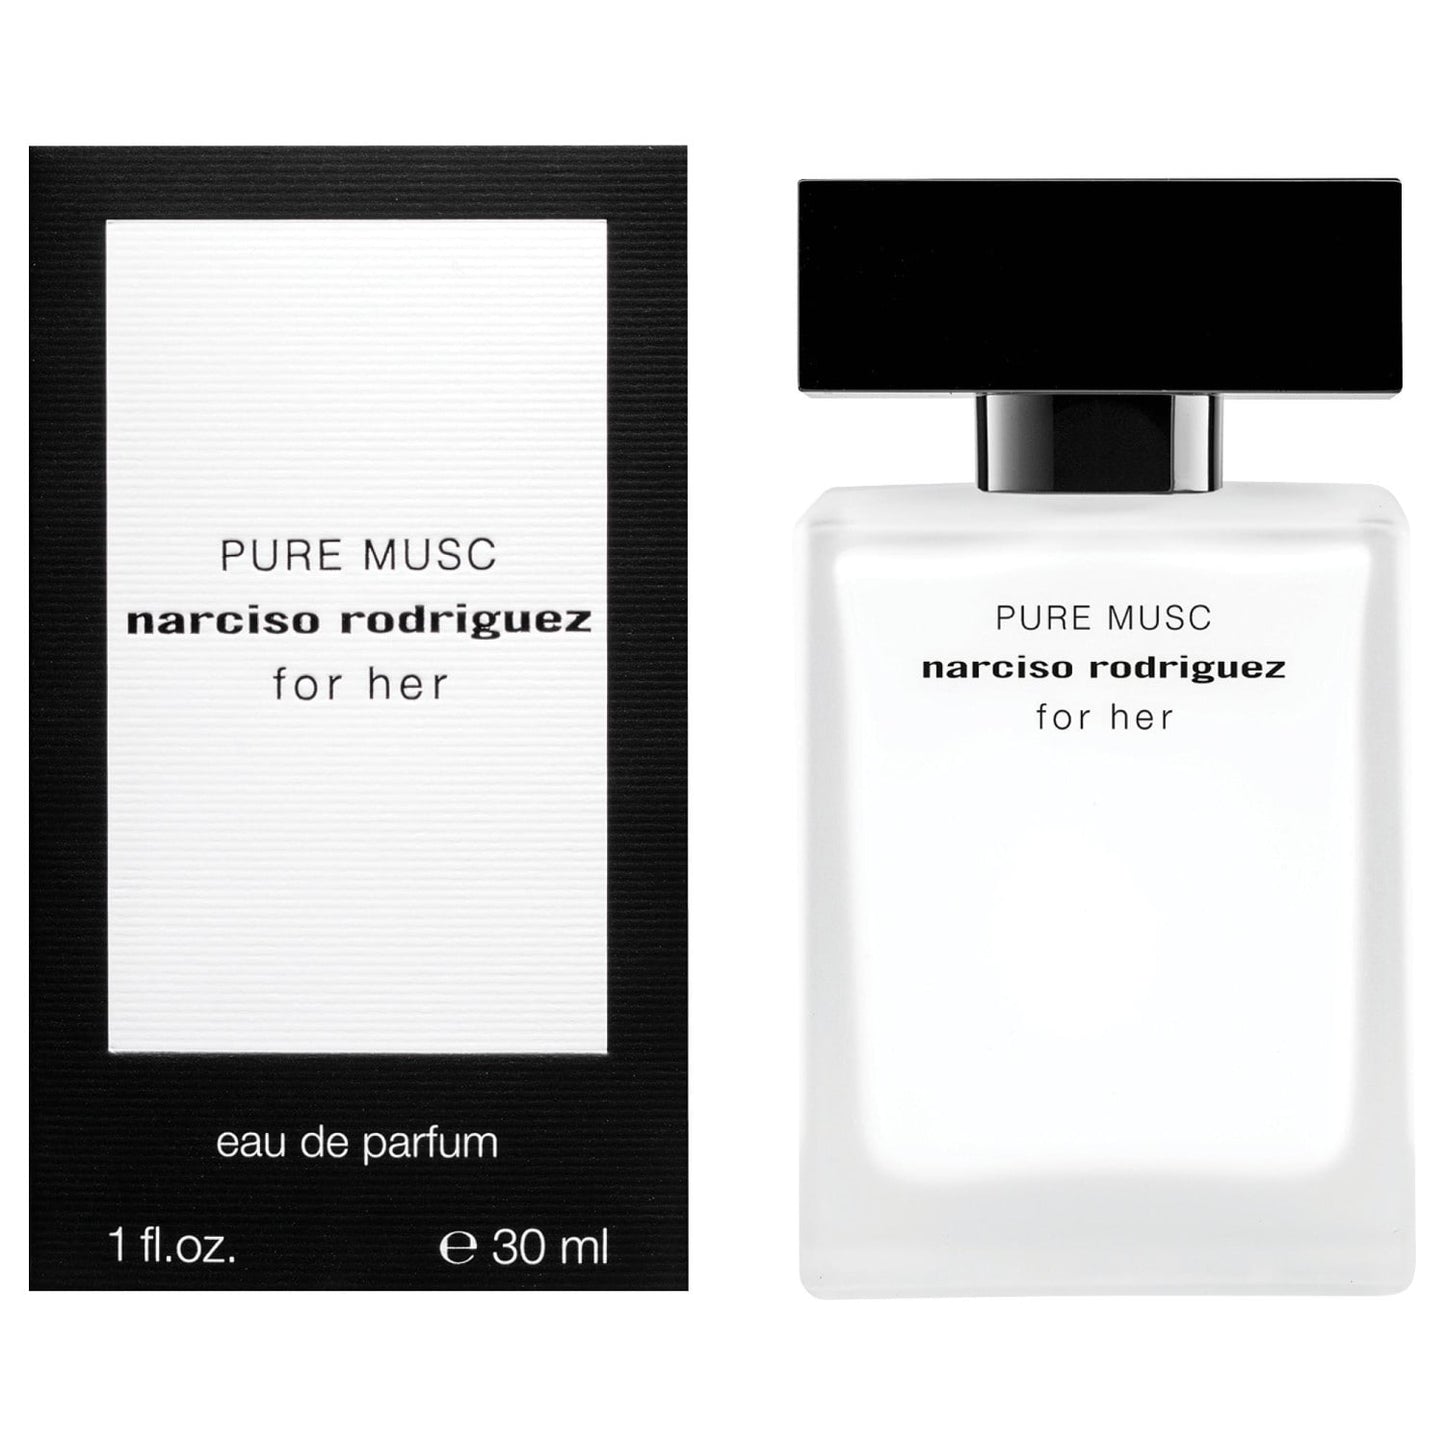 Narciso Rodriguez for her Pure Musc